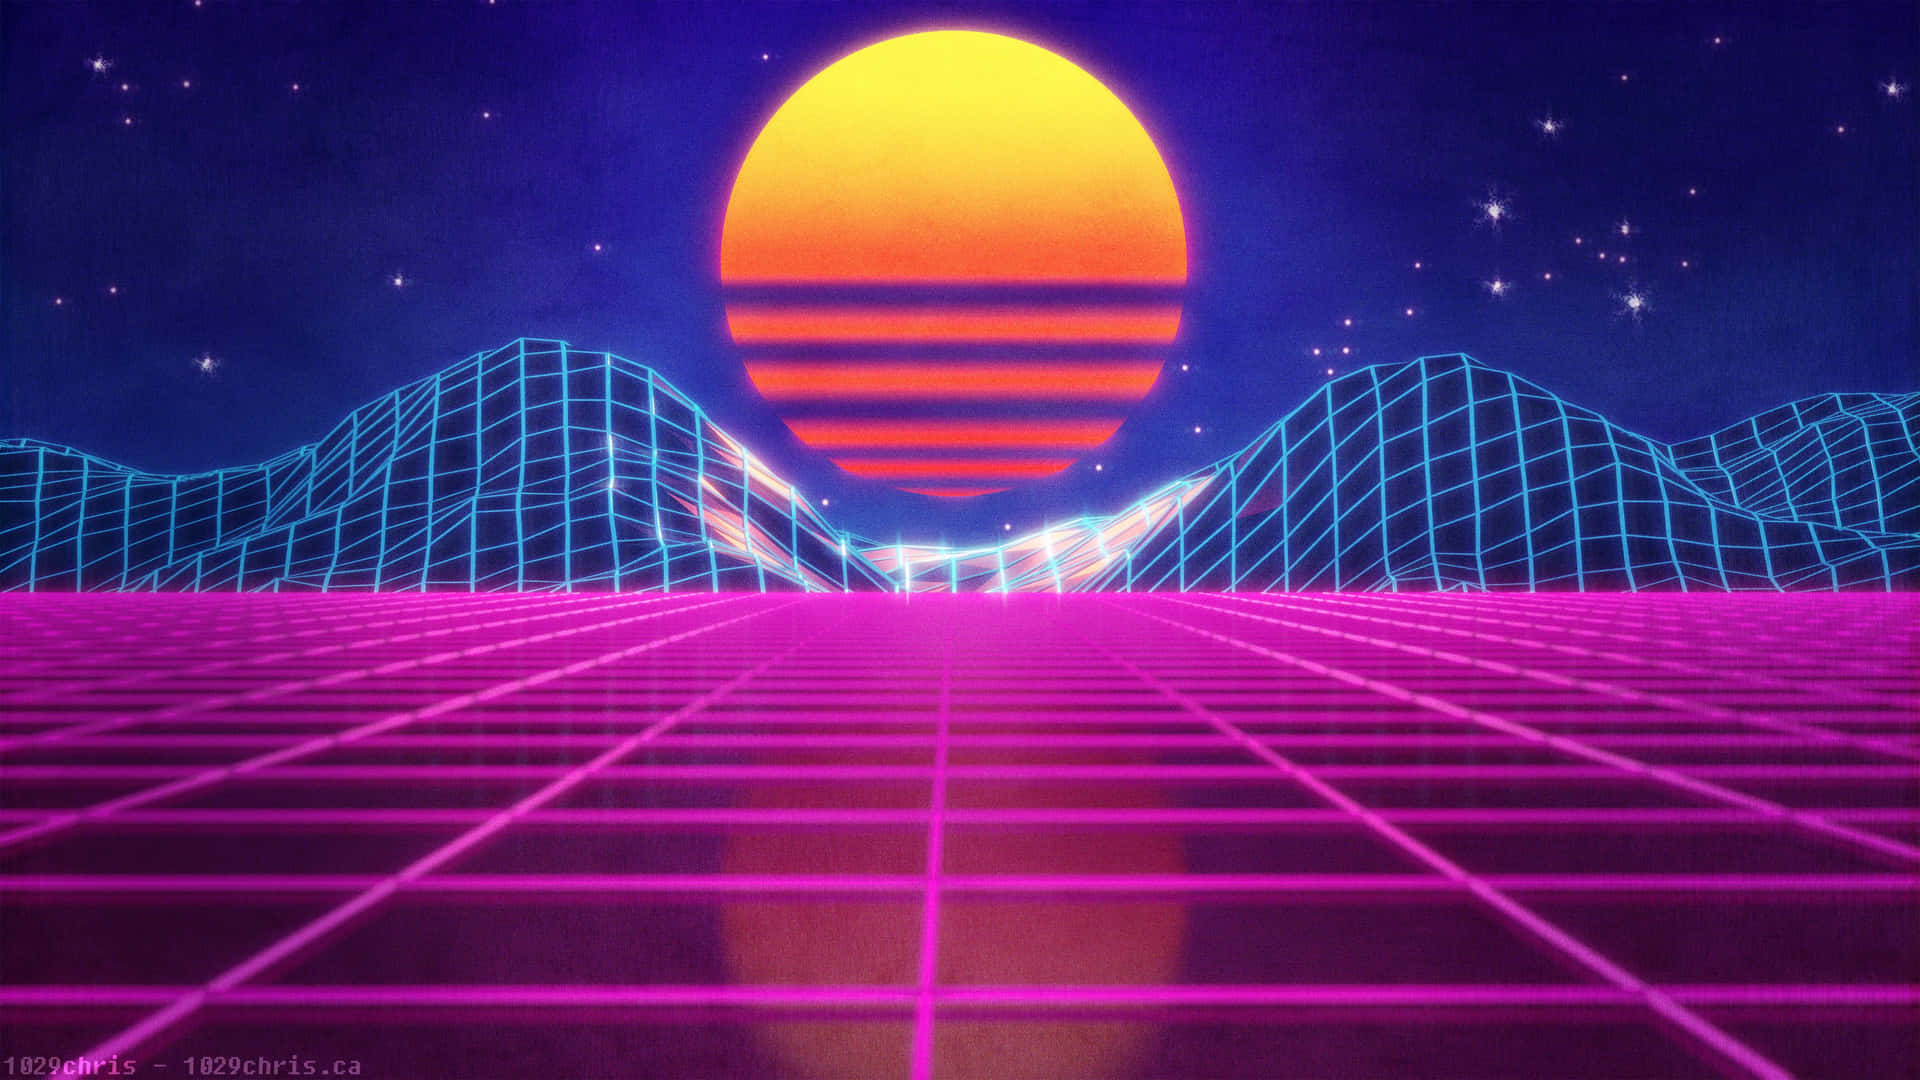 Rewind the clock and let the '80s vibes take you away! Wallpaper